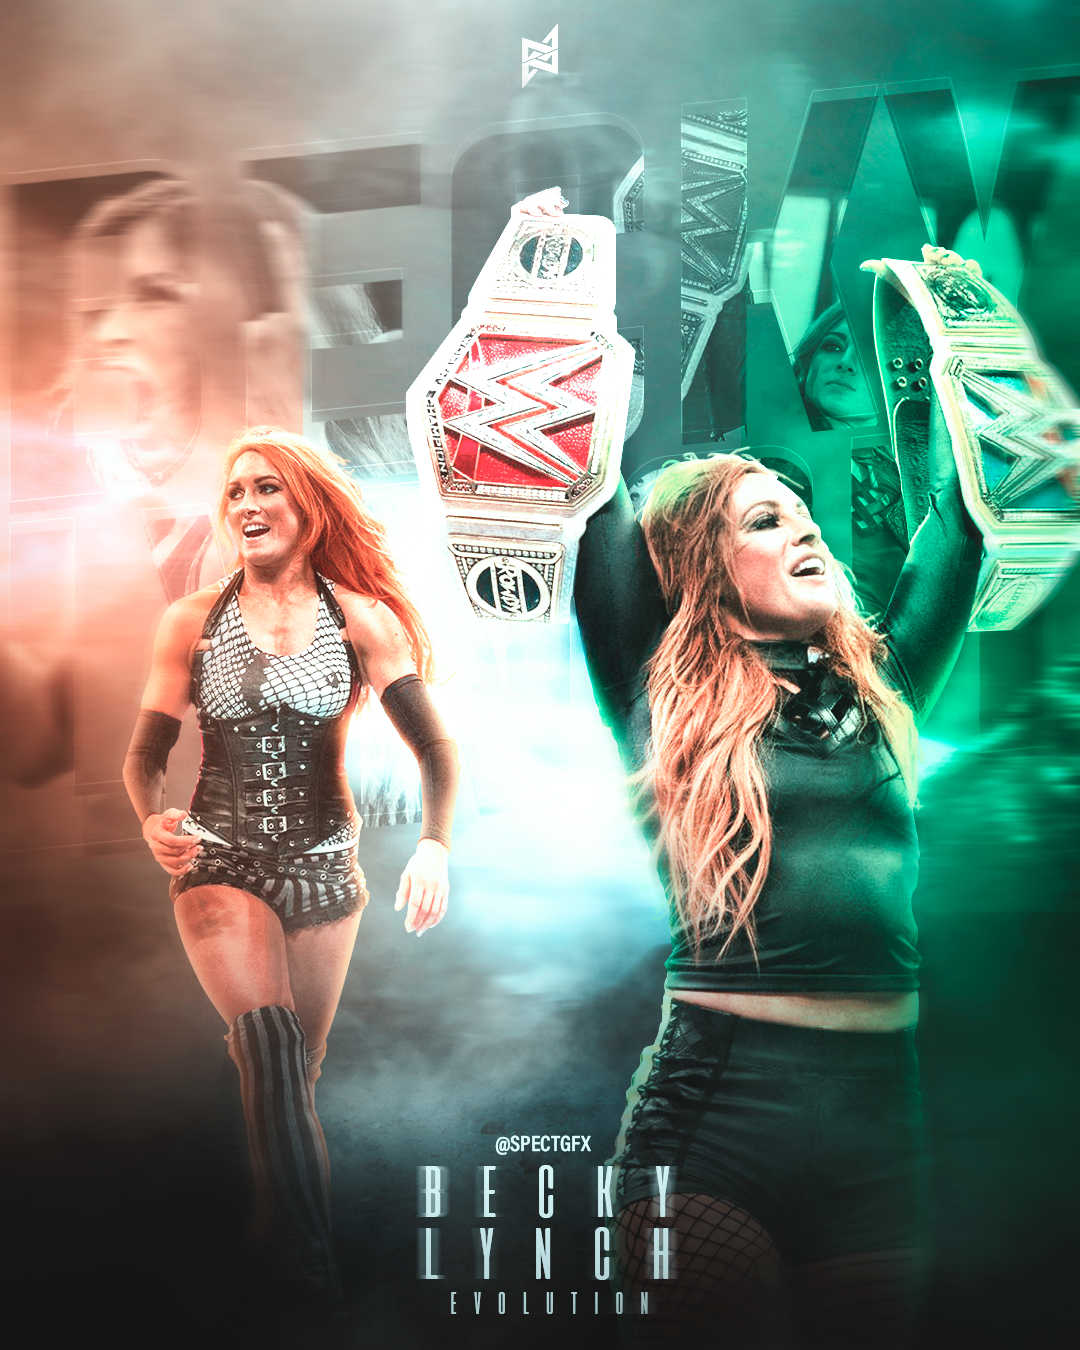 Becky lynch evolution wallpaper by todesigns on